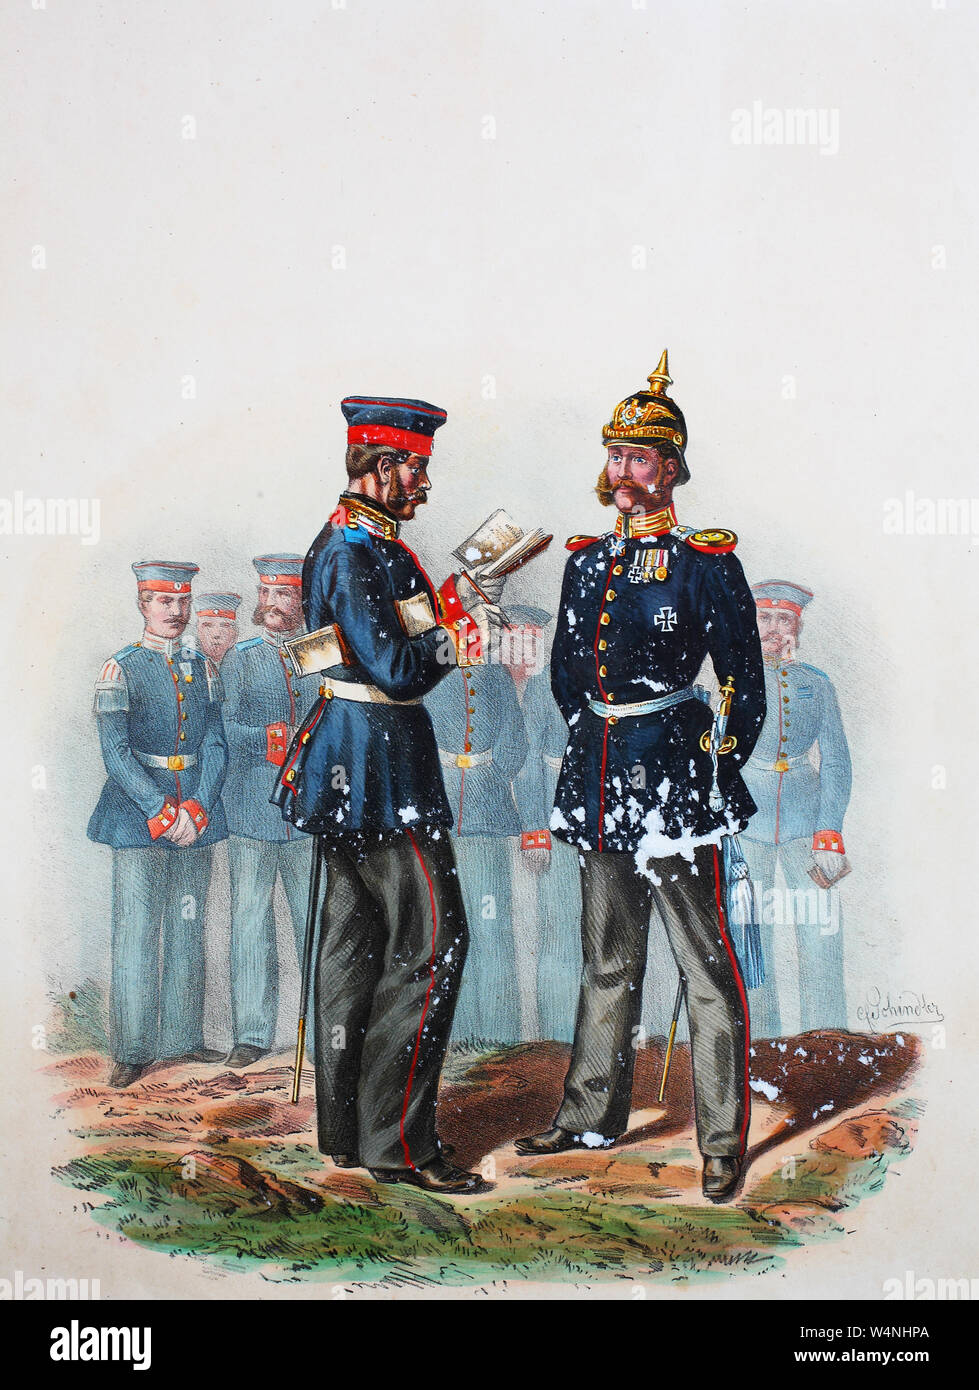 Royal Prussian Army, Guards Corps, Preußens Heer, preussische Garde, Garde Regiment zu Fuß, Feldwebel, Hauptmann, Digital improved reproduction of an illustration from the 19th century Stock Photo